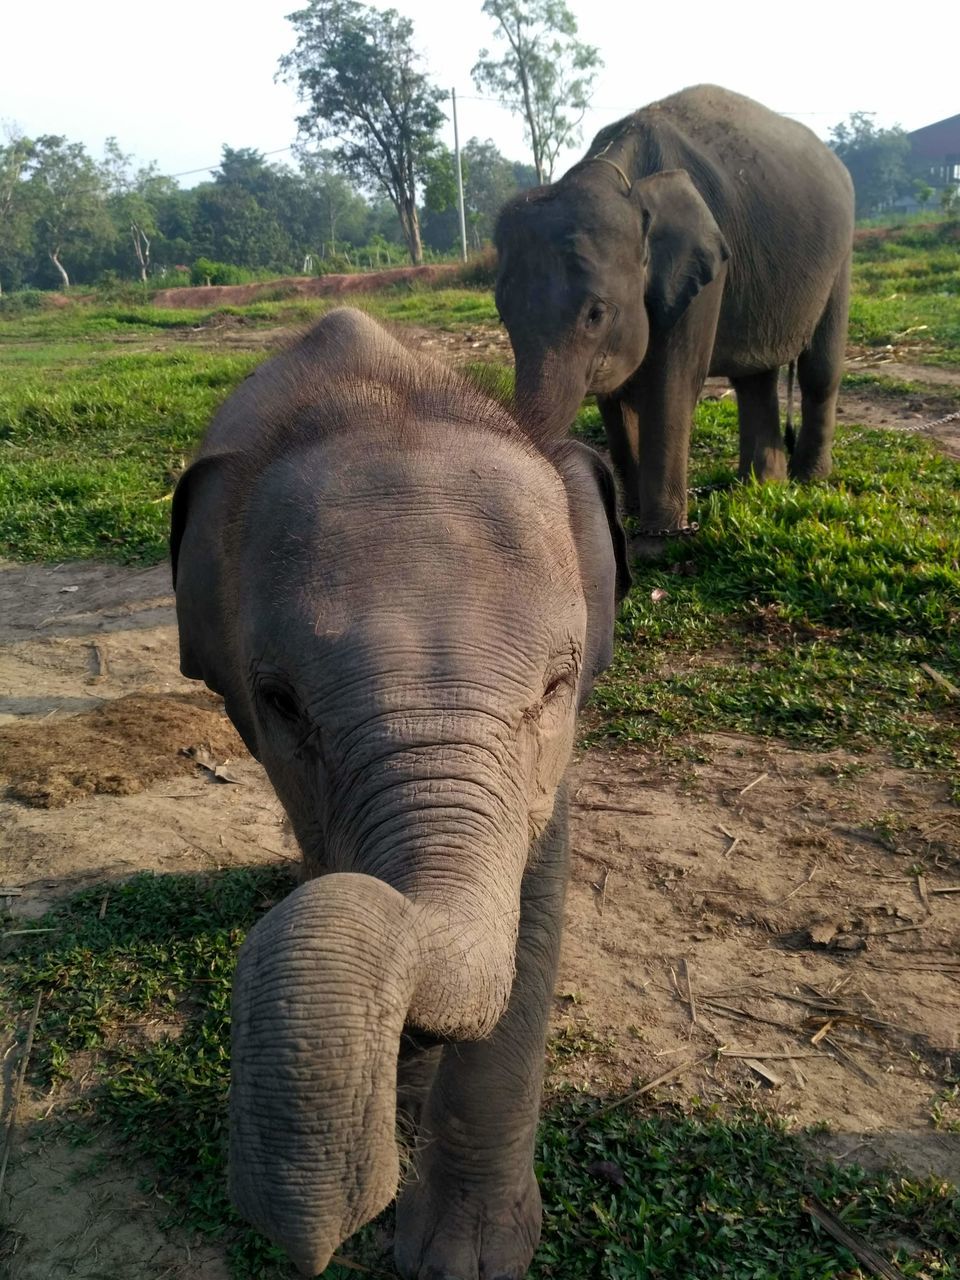 indian elephant, animal themes, animal, elephant, mammal, animal wildlife, wildlife, african elephant, plant, animal body part, group of animals, nature, no people, safari, animal trunk, grass, tree, environment, adventure, day, young animal, outdoors, elephant calf, two animals, land, standing, tusk, landscape, travel destinations, domestic animals, zoo, full length, tourism, sky, field